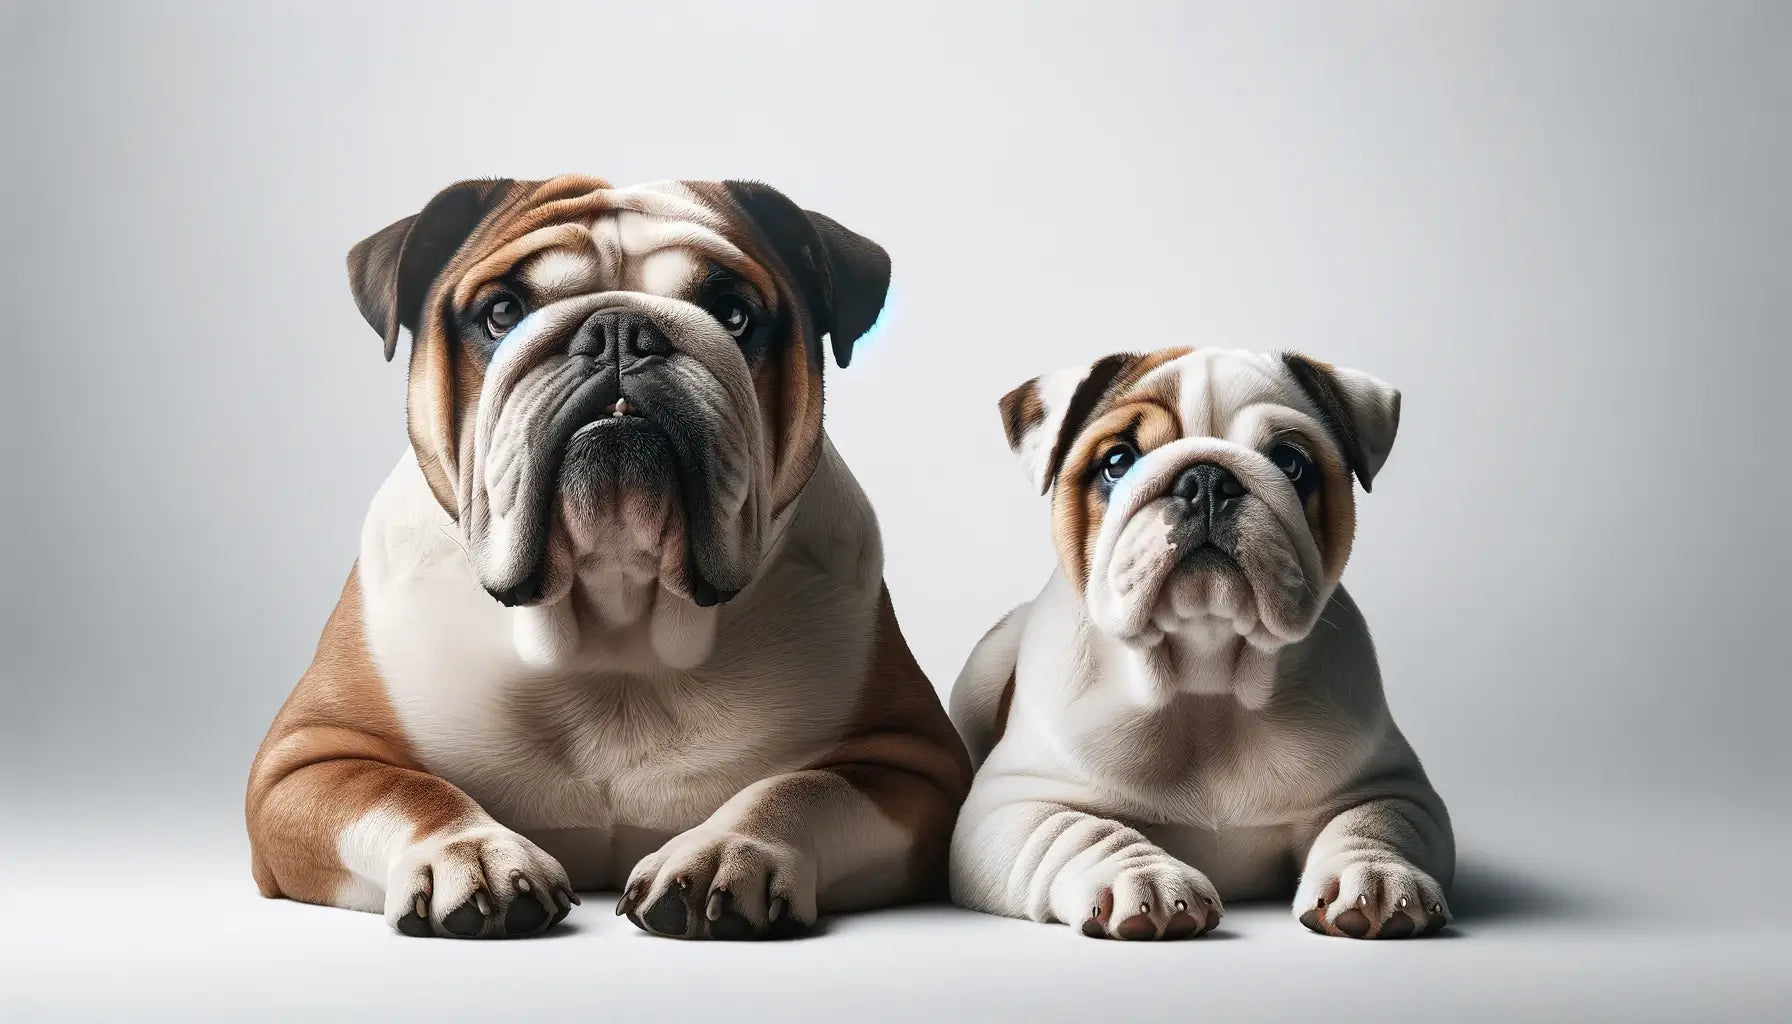 Image showing an English Bulldog with a robust frame and pronounced wrinkles lying next to an Olde English Bulldogge on a pristine white background.